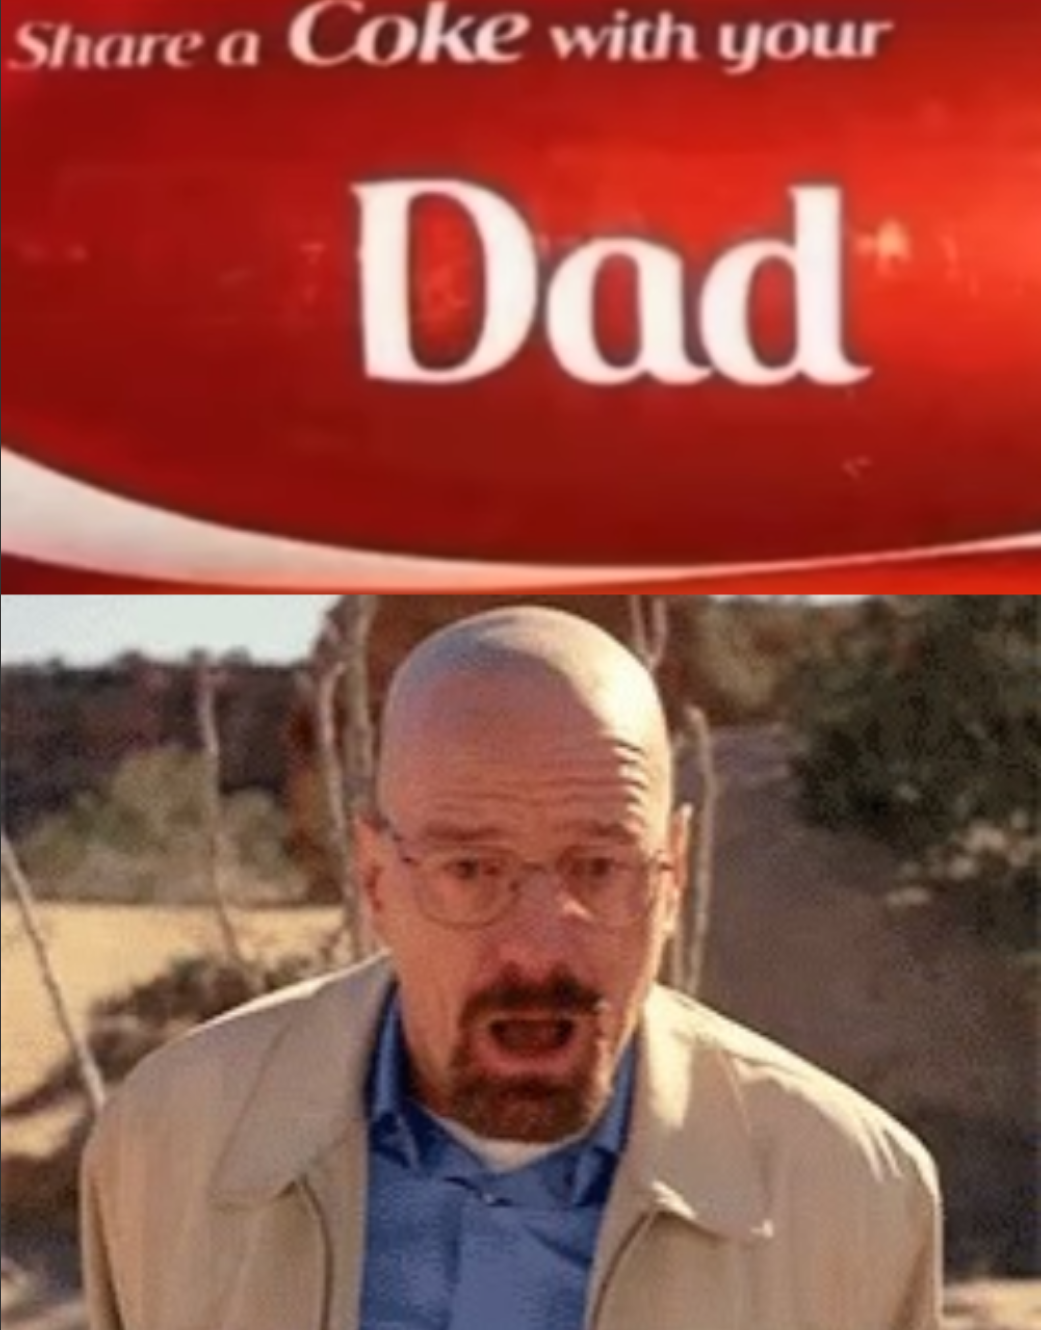 Share this coke with your dad Blank Meme Template